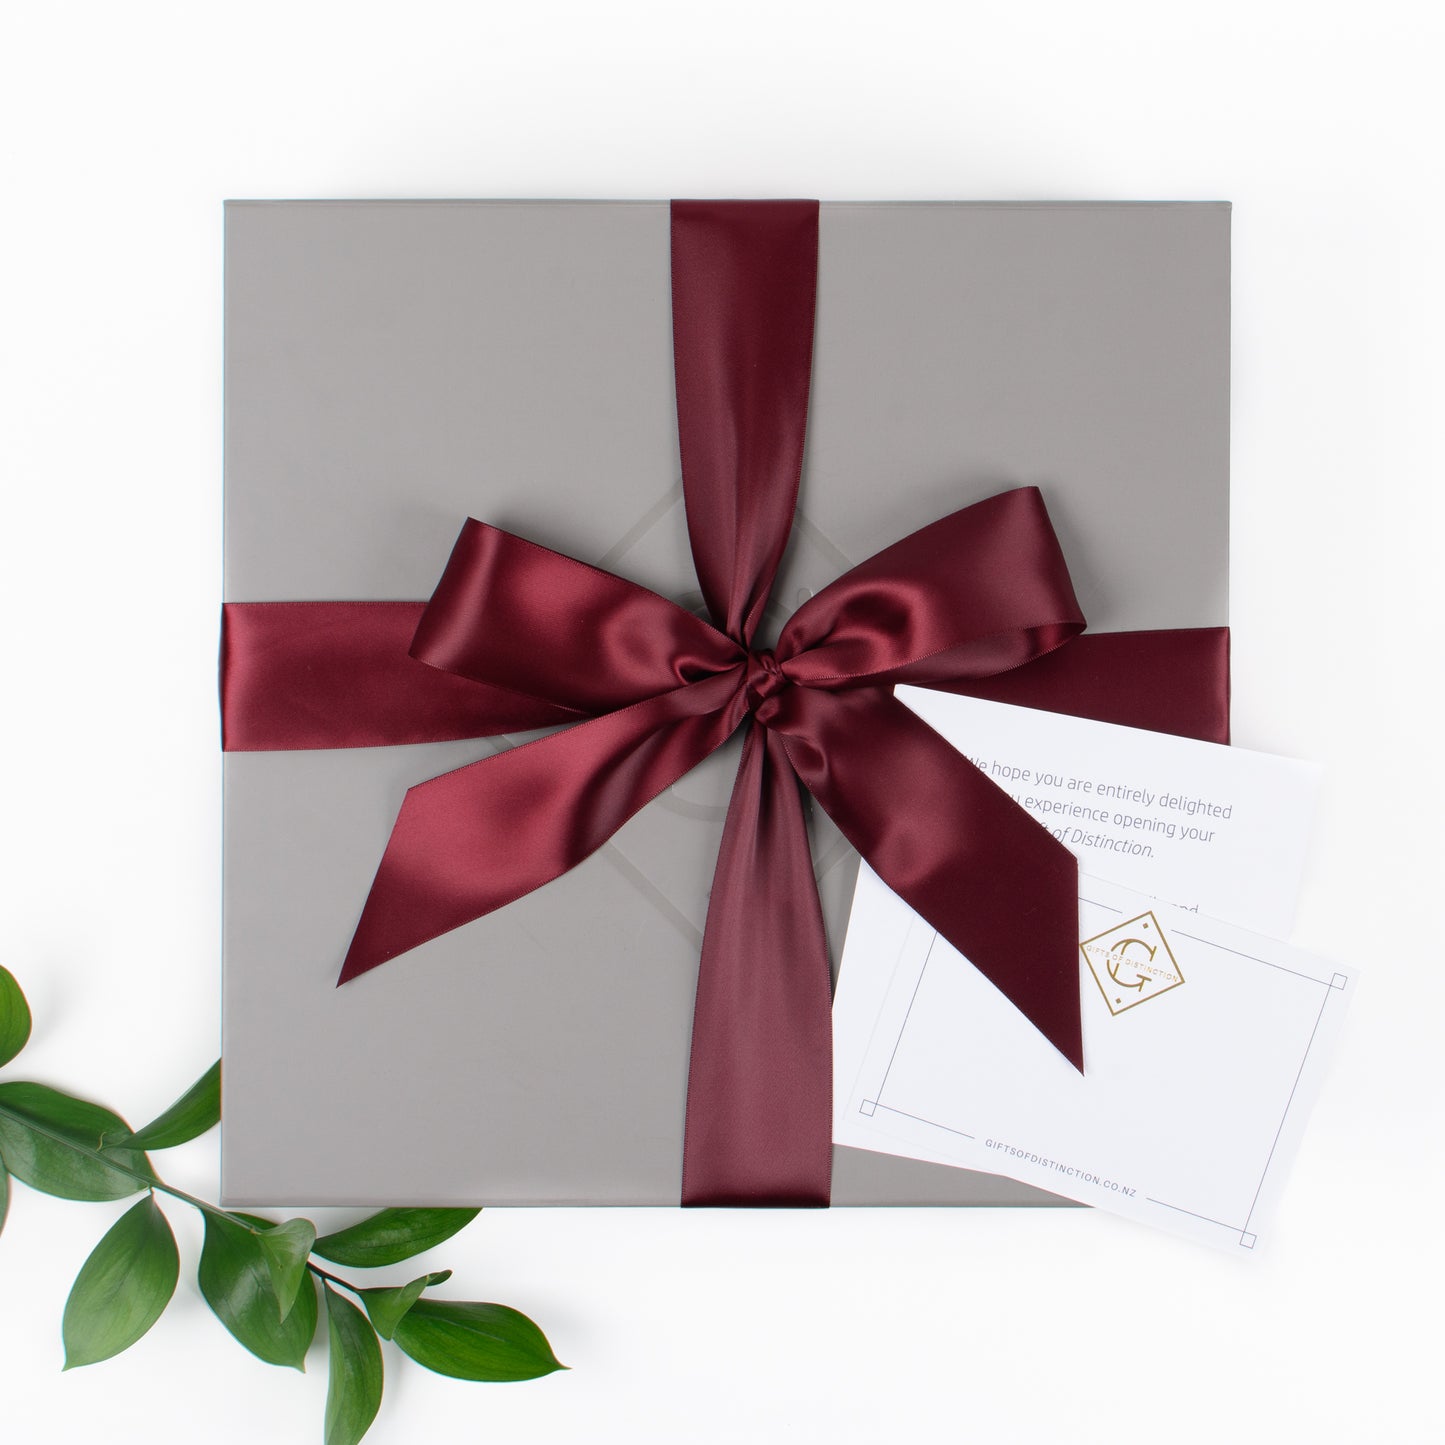 Select Him - Gift Boxes NZ - Gifts of Distinction